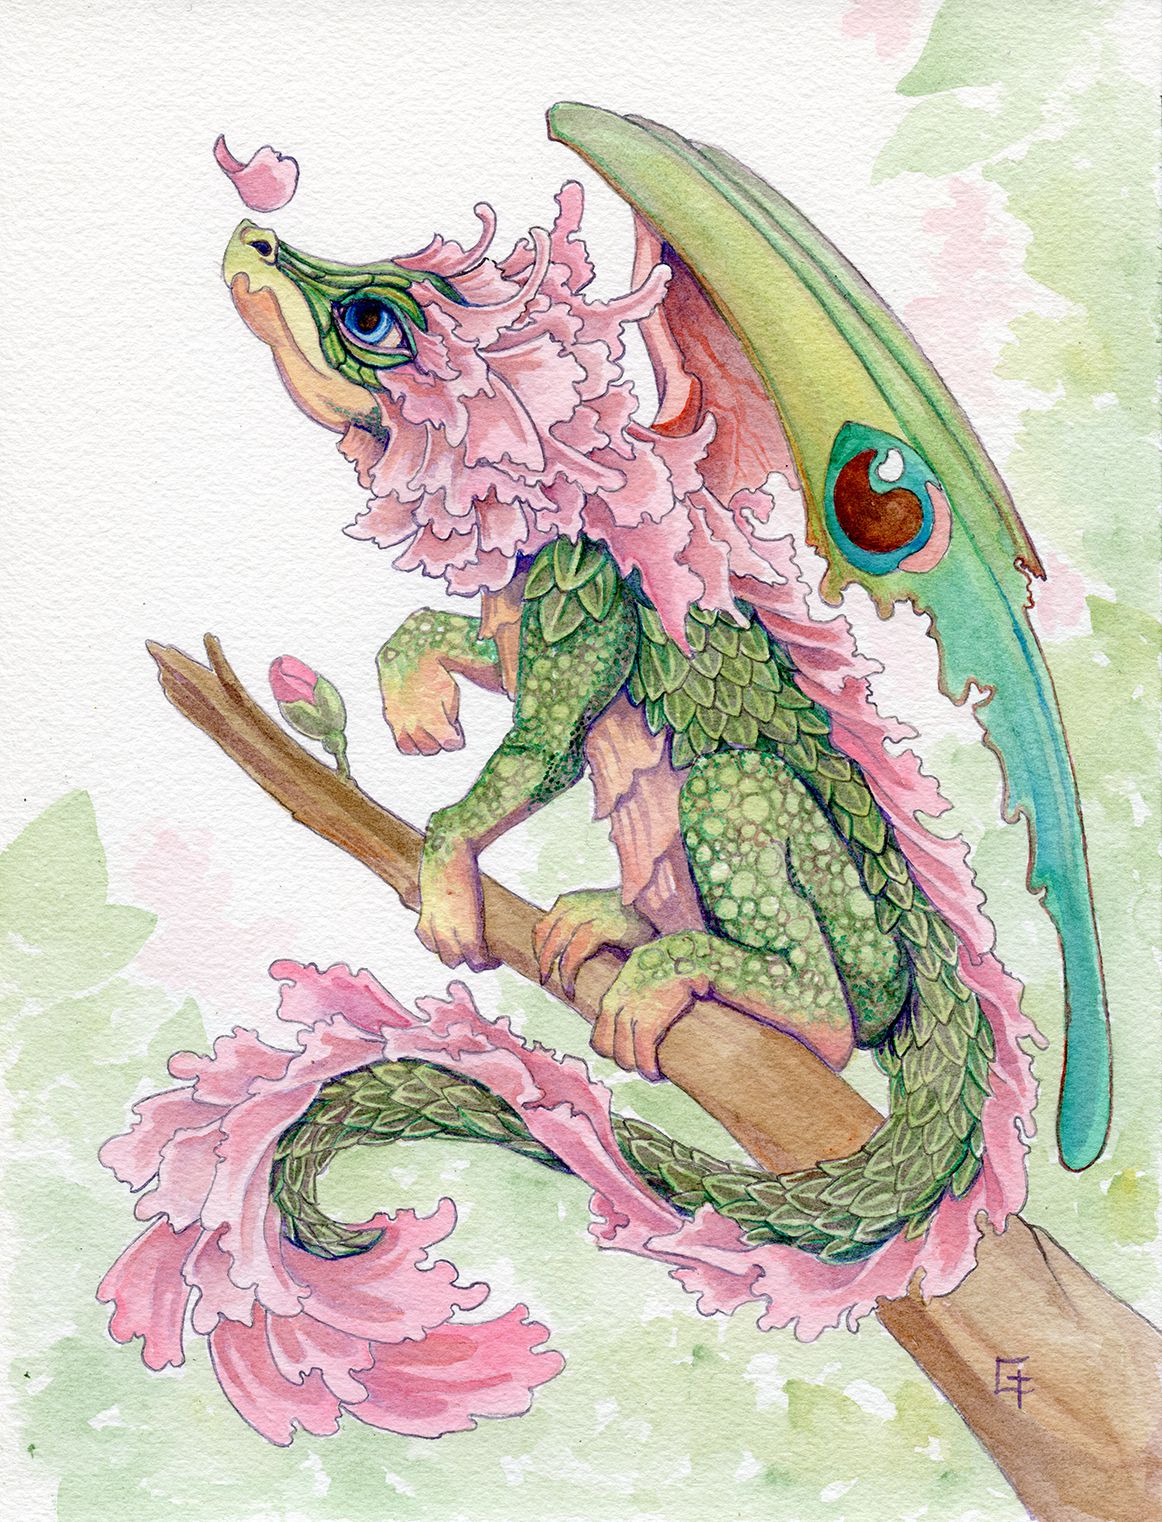 Unique And Wonderful Dragons Watercolors By Carrieann Truitt 2